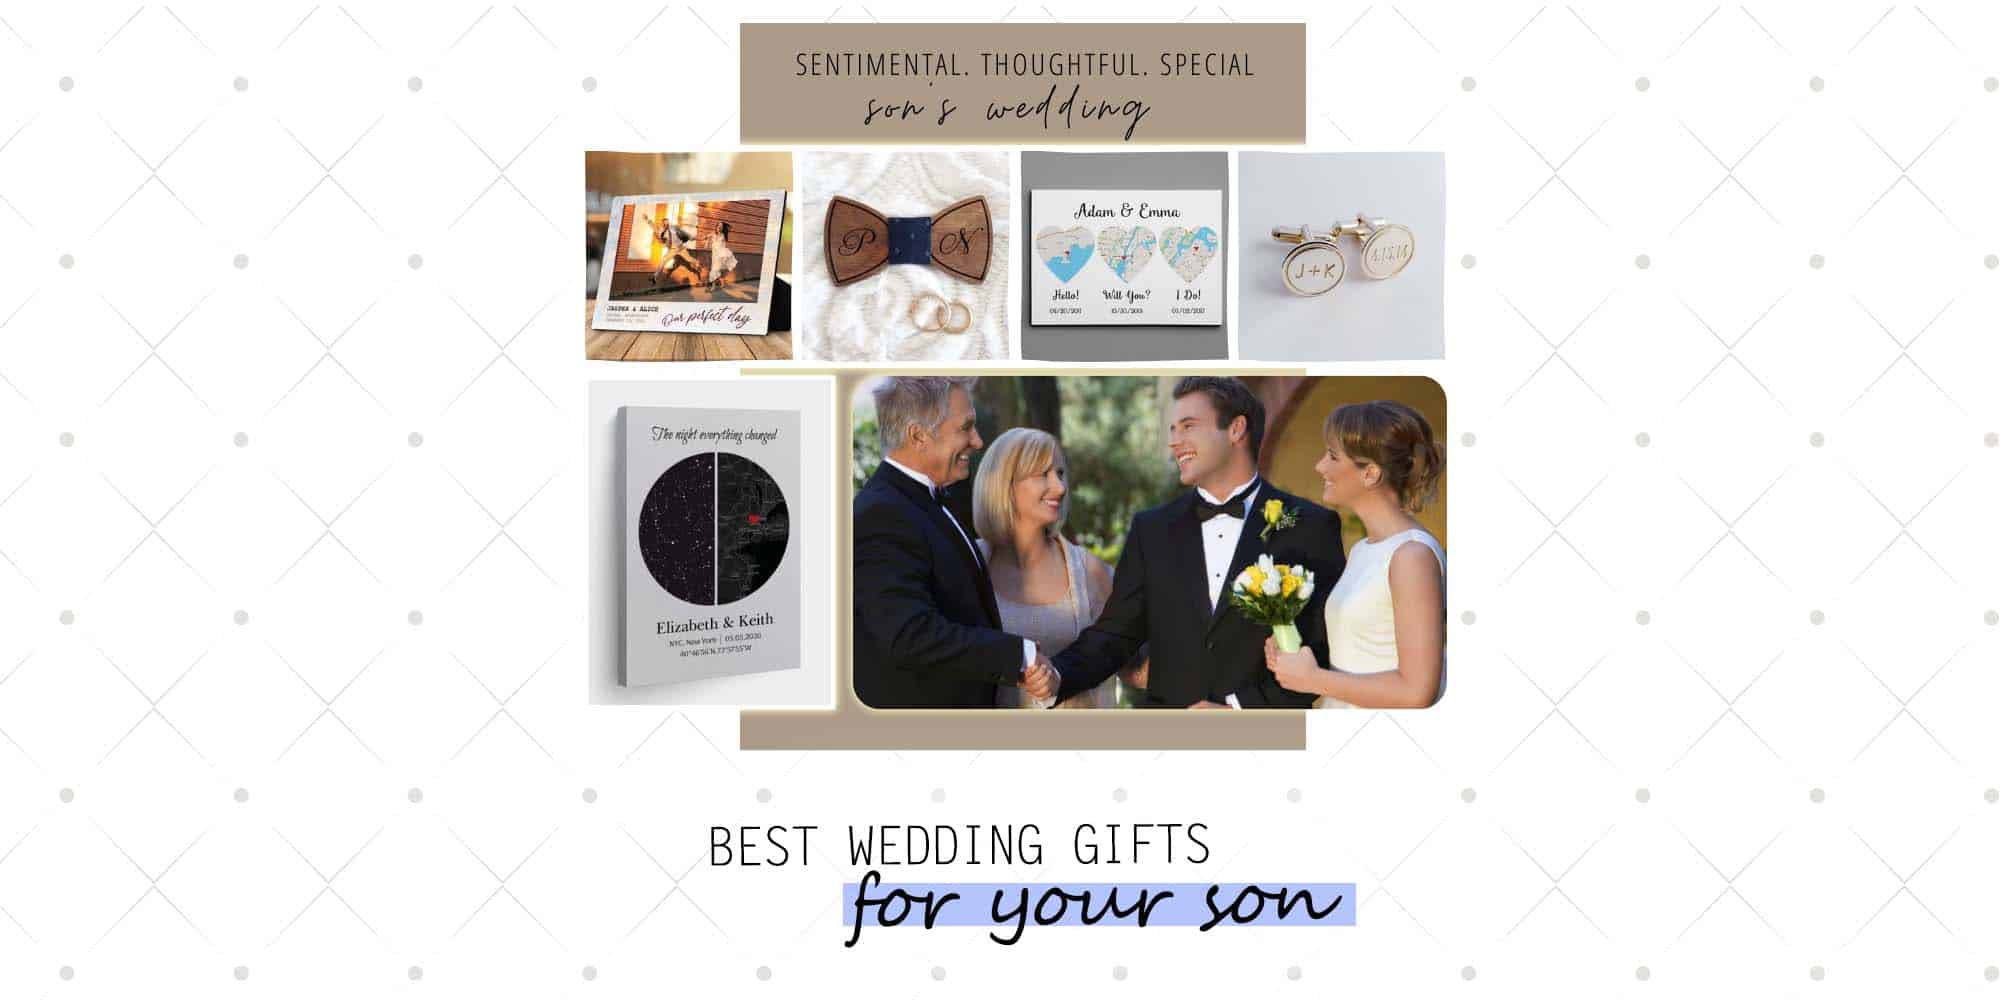 27 Best Wedding Gifts for Son from Parents (2021)